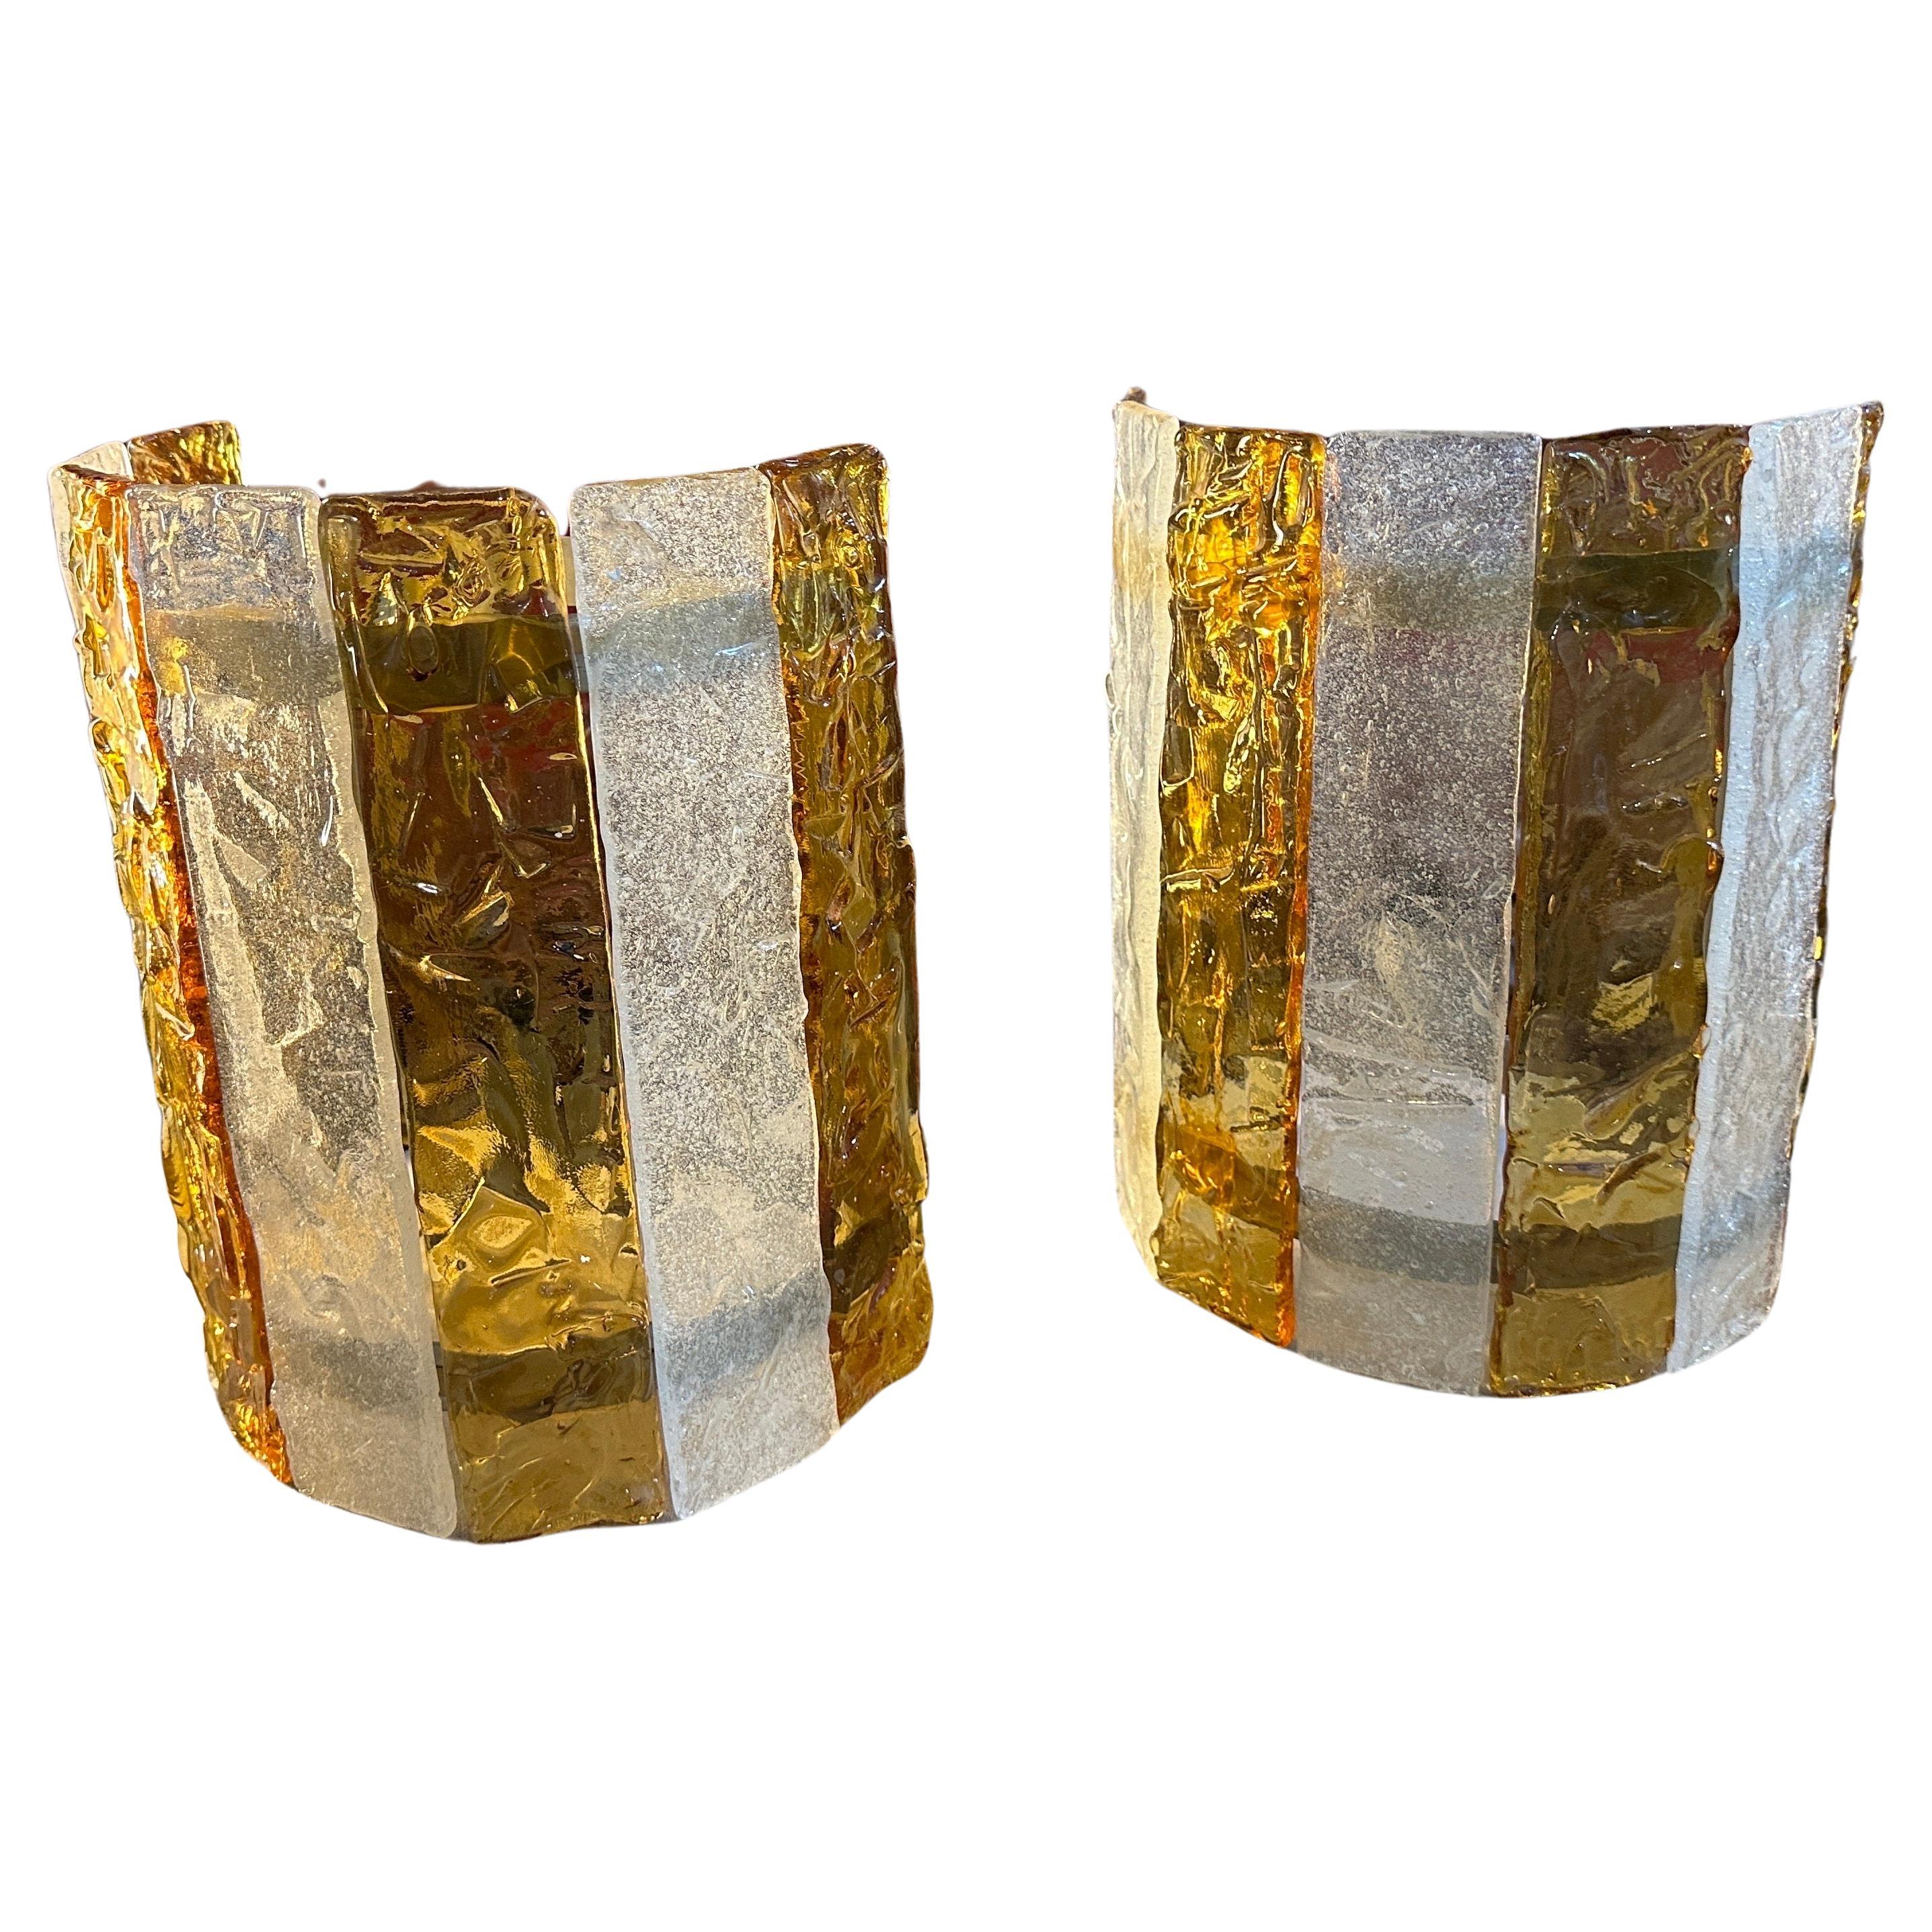 Two 70s Mid-Century Modern White and Yellow Murano Glass Wall Sconces by Mazzega For Sale